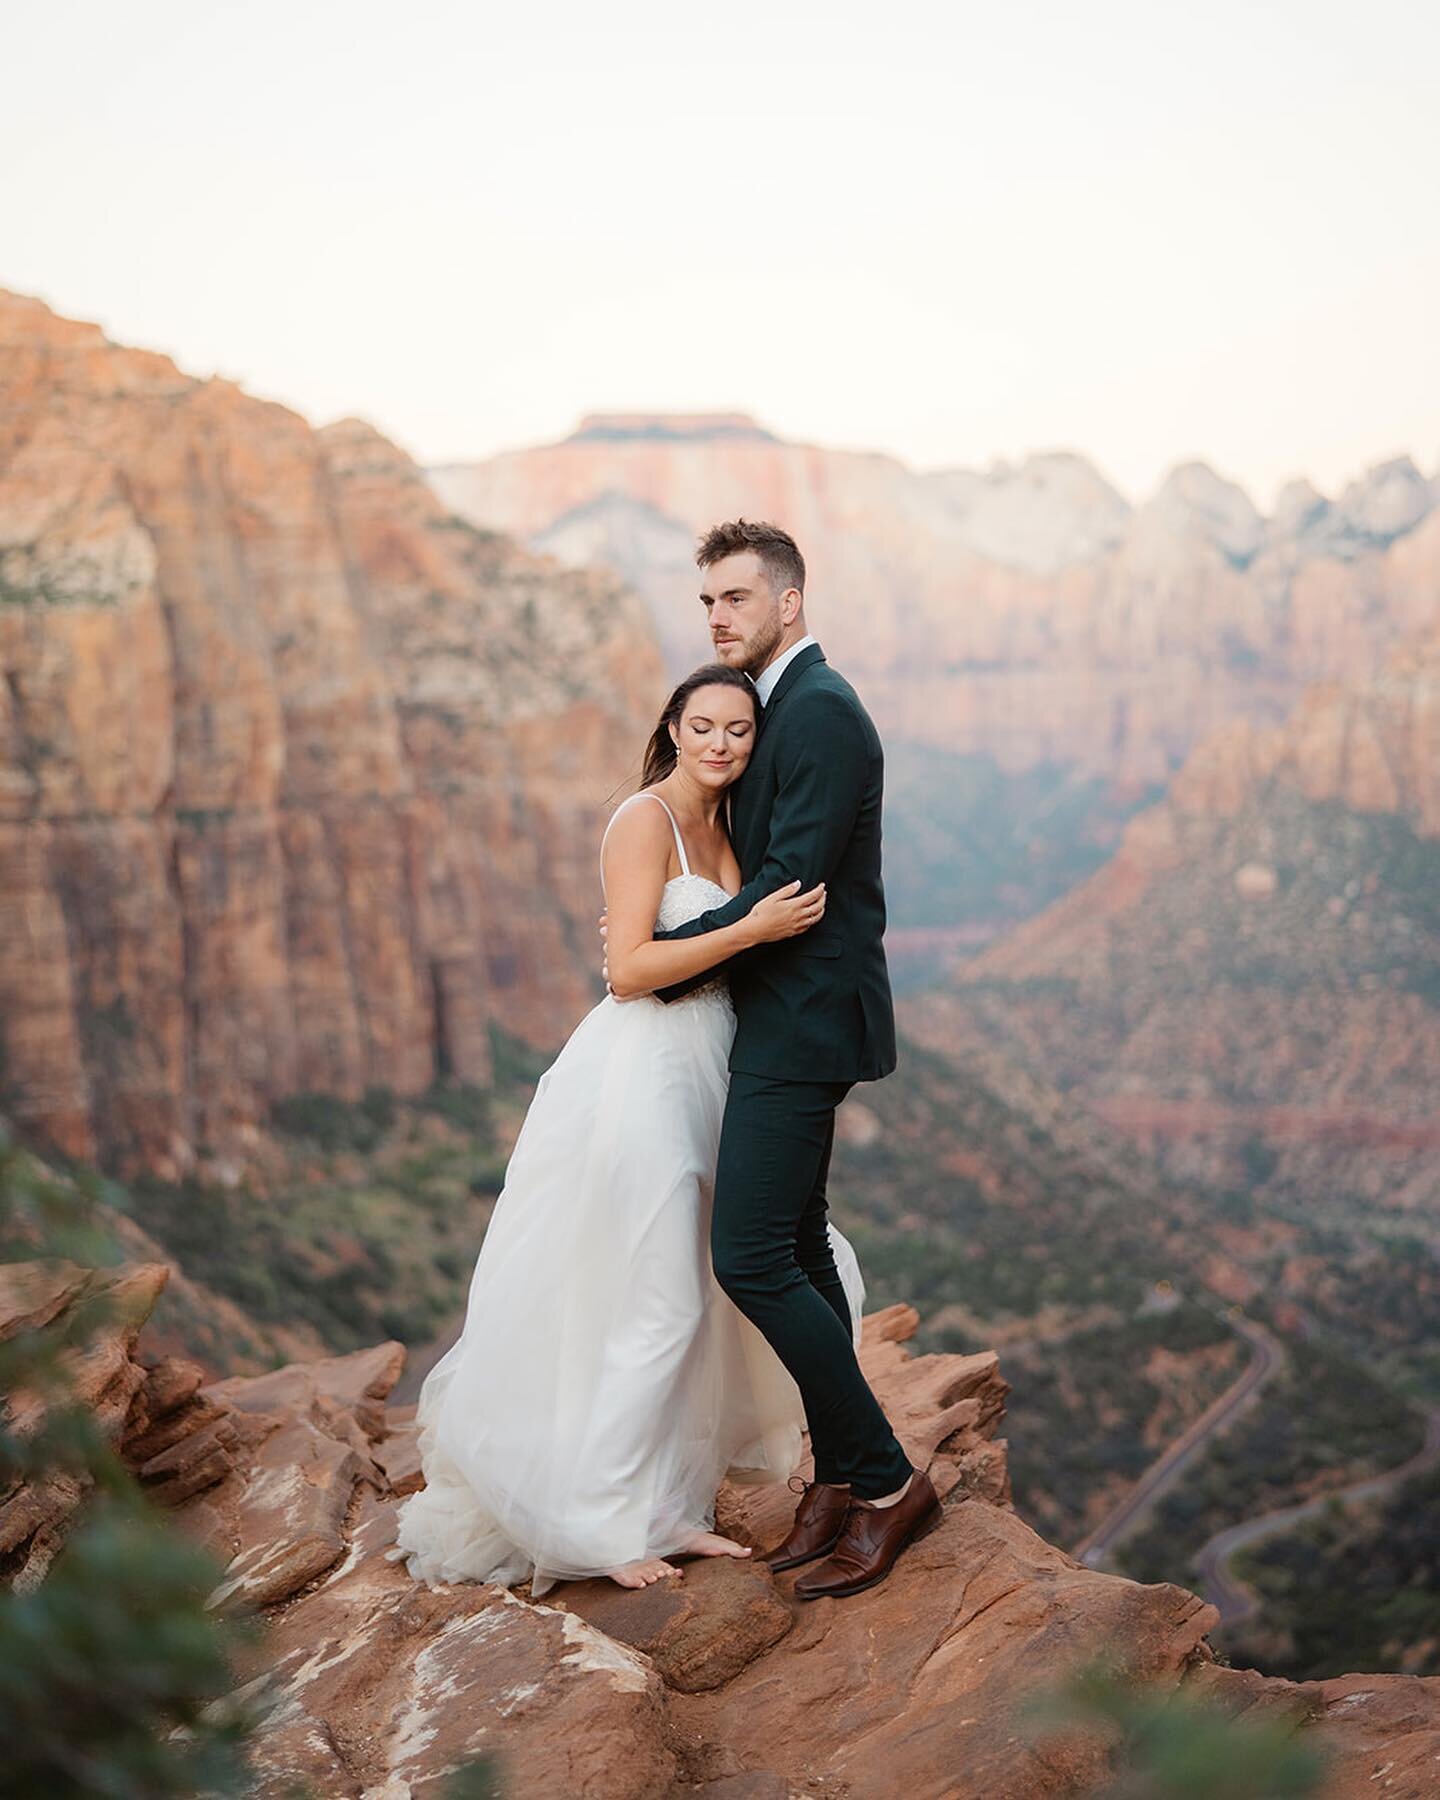 Utah is, like, really really pretty. You should run away and elope there and I&rsquo;ll hide in the bushes with the bighorn sheeps and take photos. 
🌳📷👀🐐🌳
.
.
.
#moabelopementphotographer #moabwedding #moabweddingphotographer  #zionelopement  #u